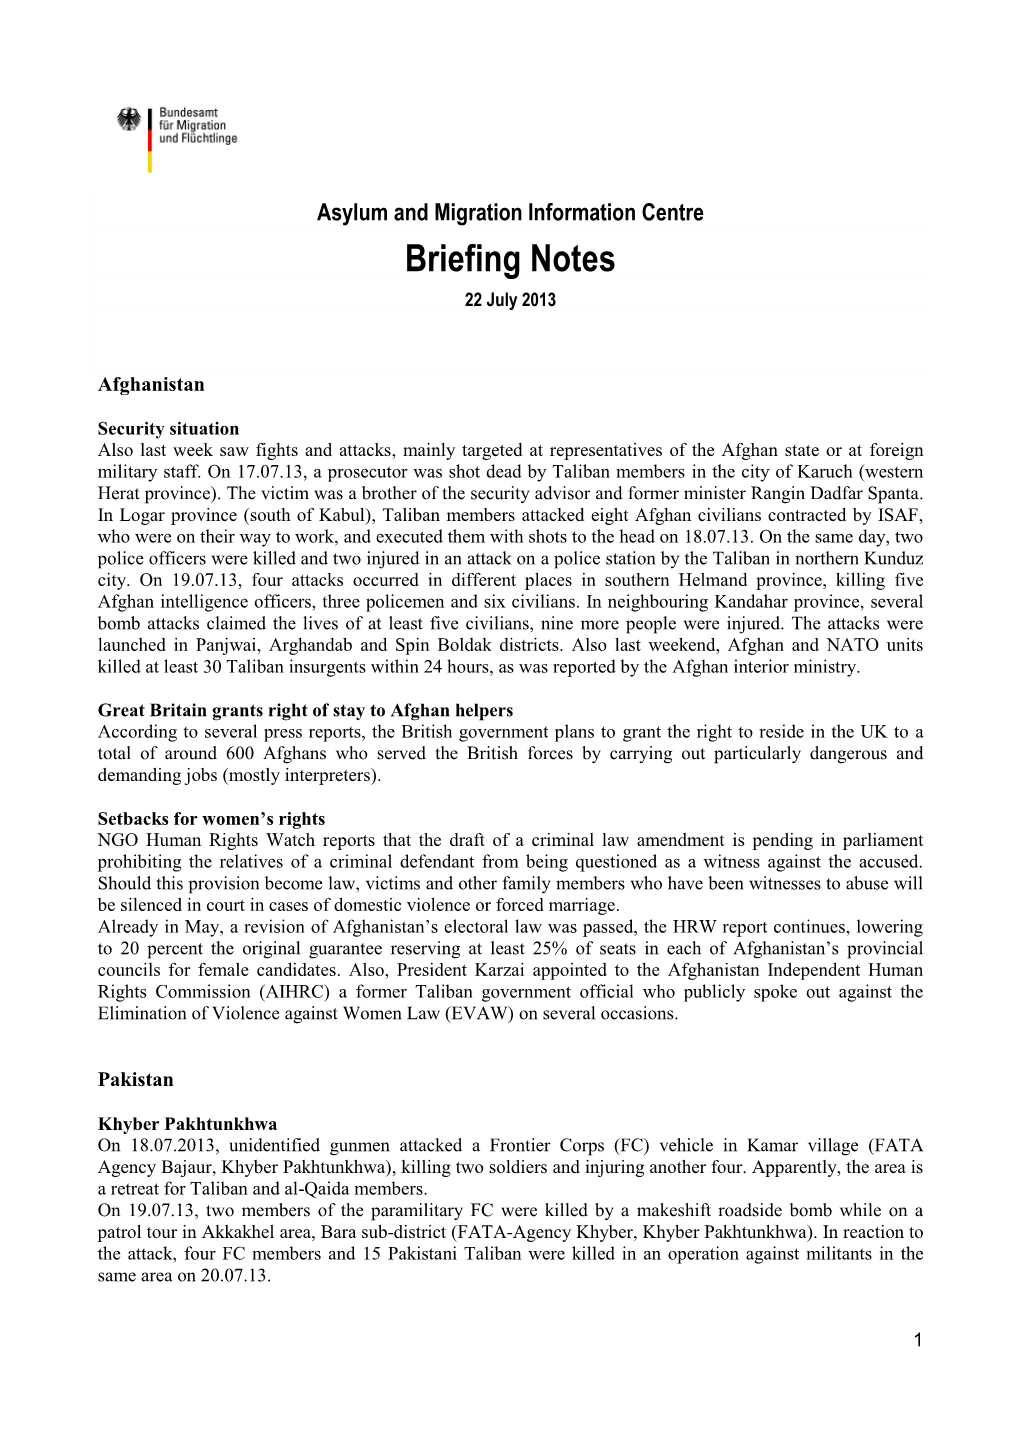 Briefing Notes 22 July 2013